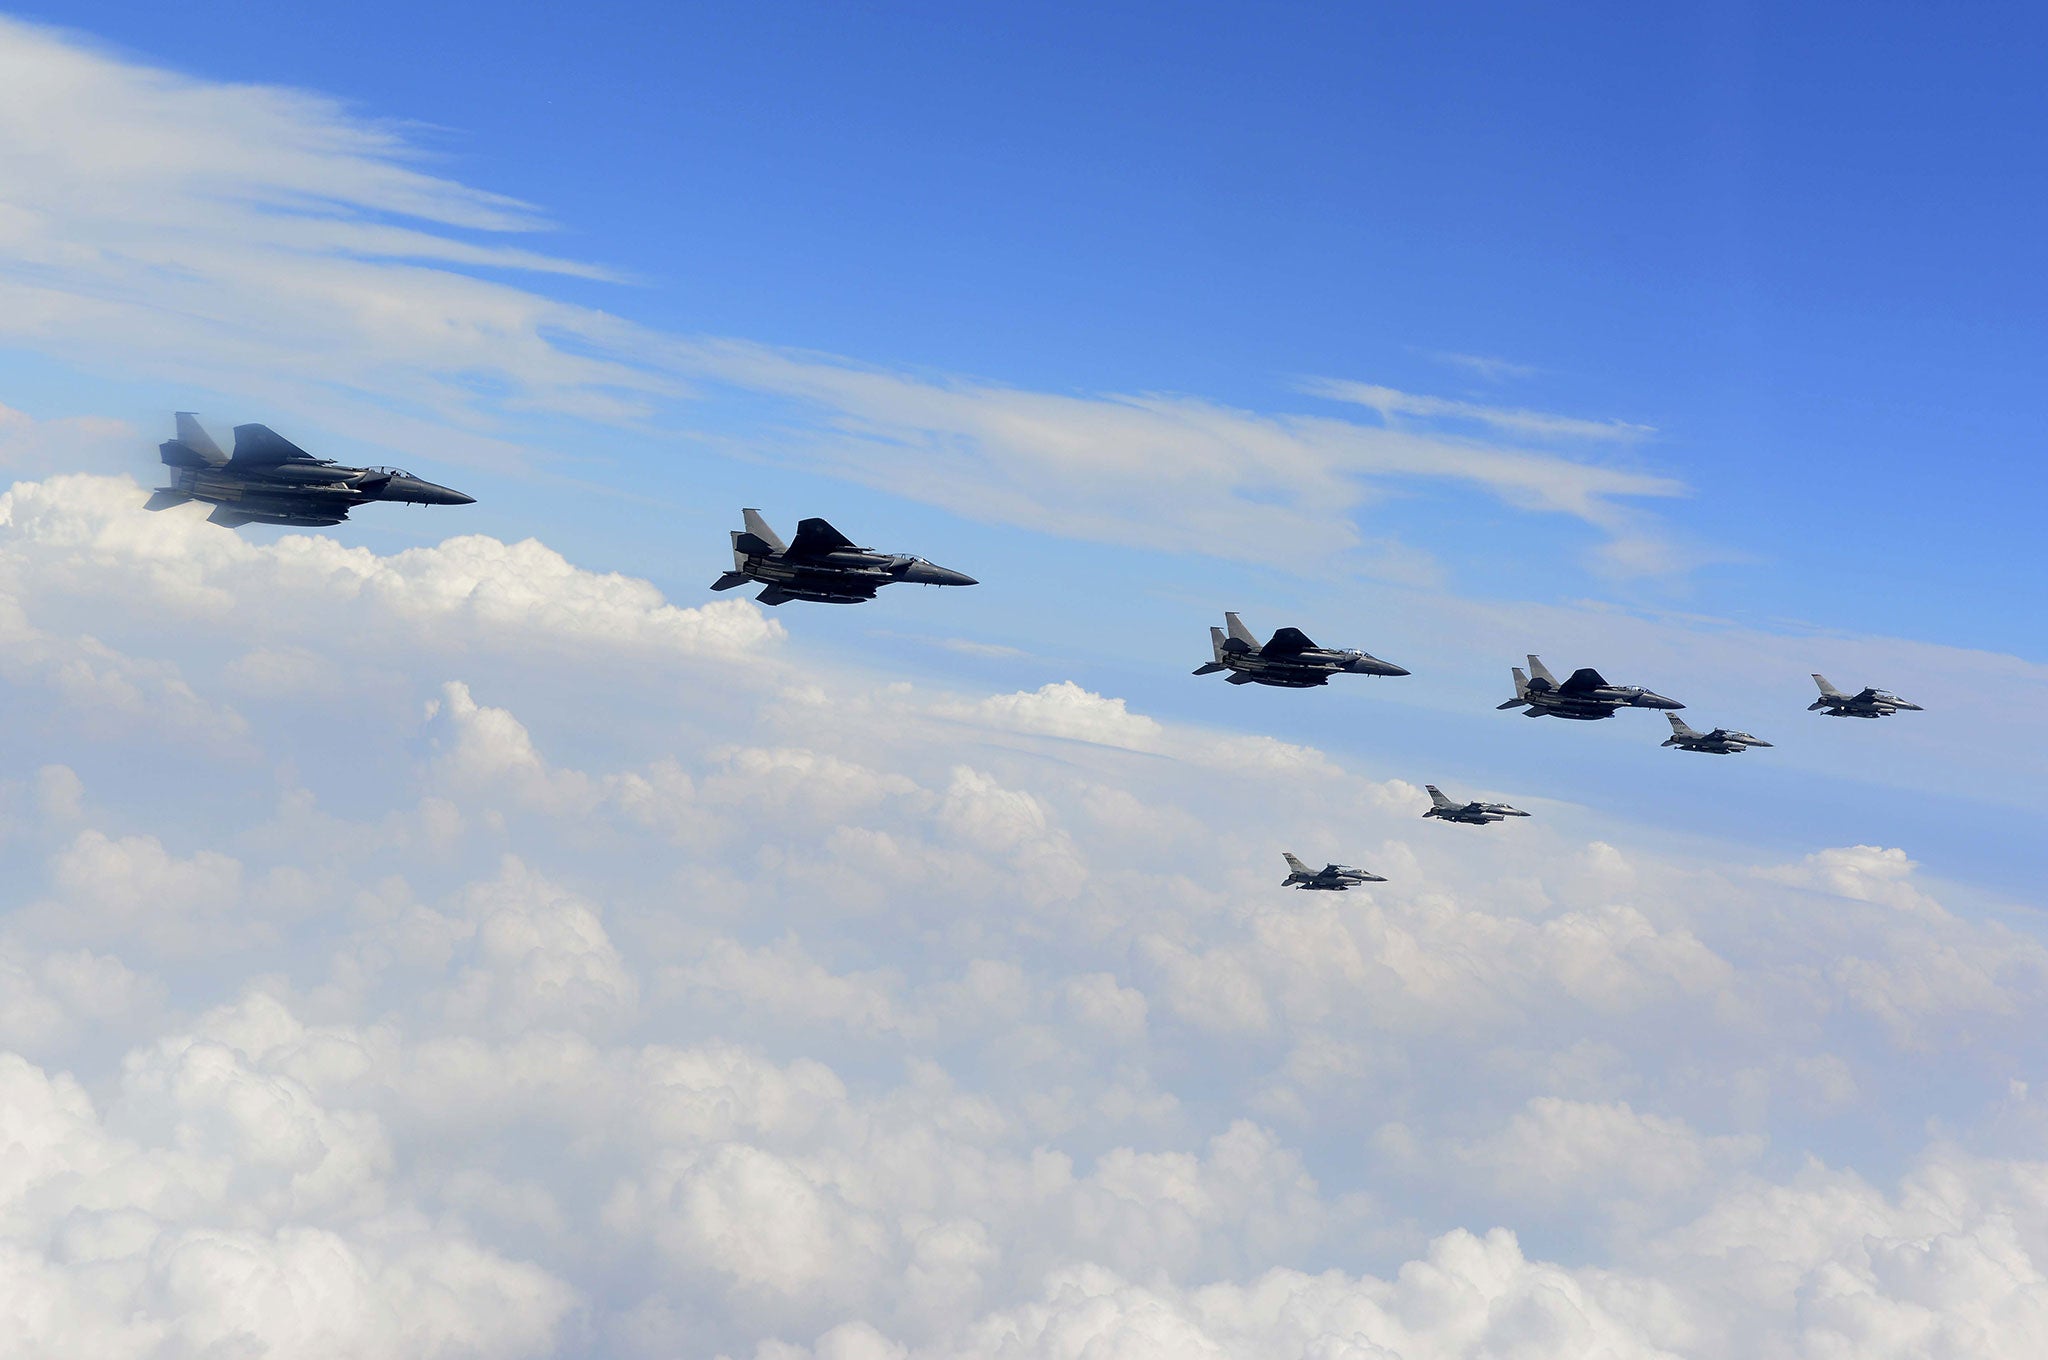 US and South Korean fighter jets fly over the Korean Peninsula on 22 August